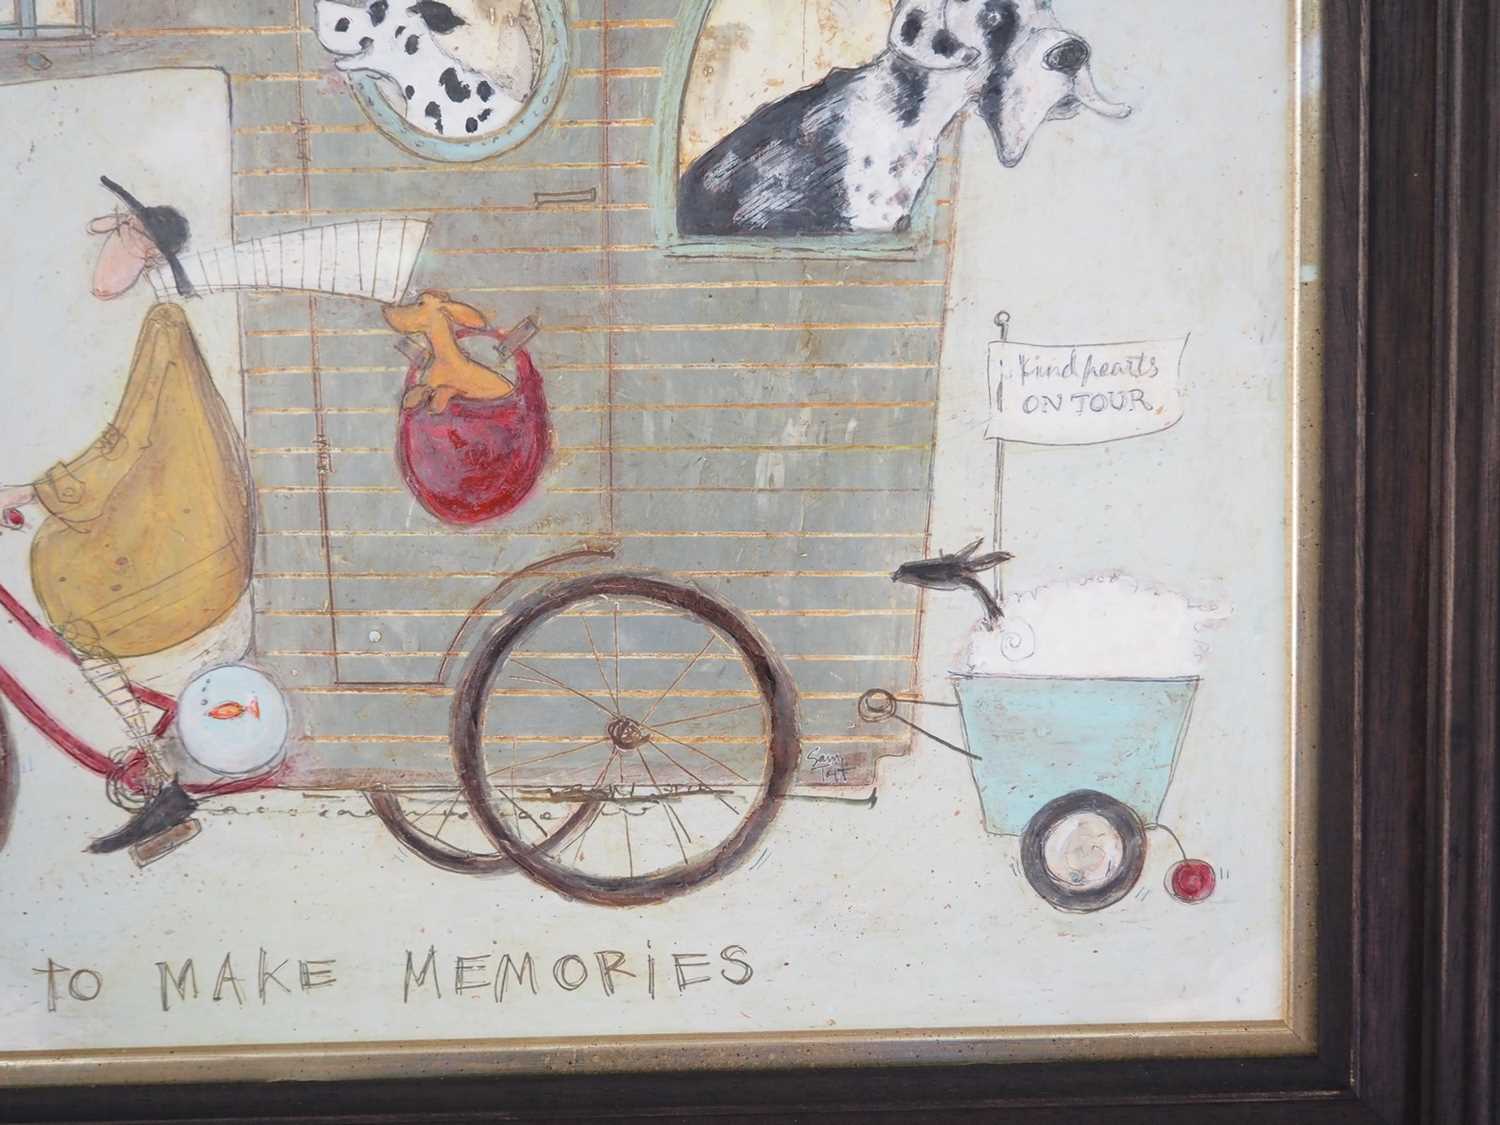 Sam Toft 'TIME TO MAKE MEMORIES' - mixed media and sgraffito on acid free board - signed - - Image 6 of 6